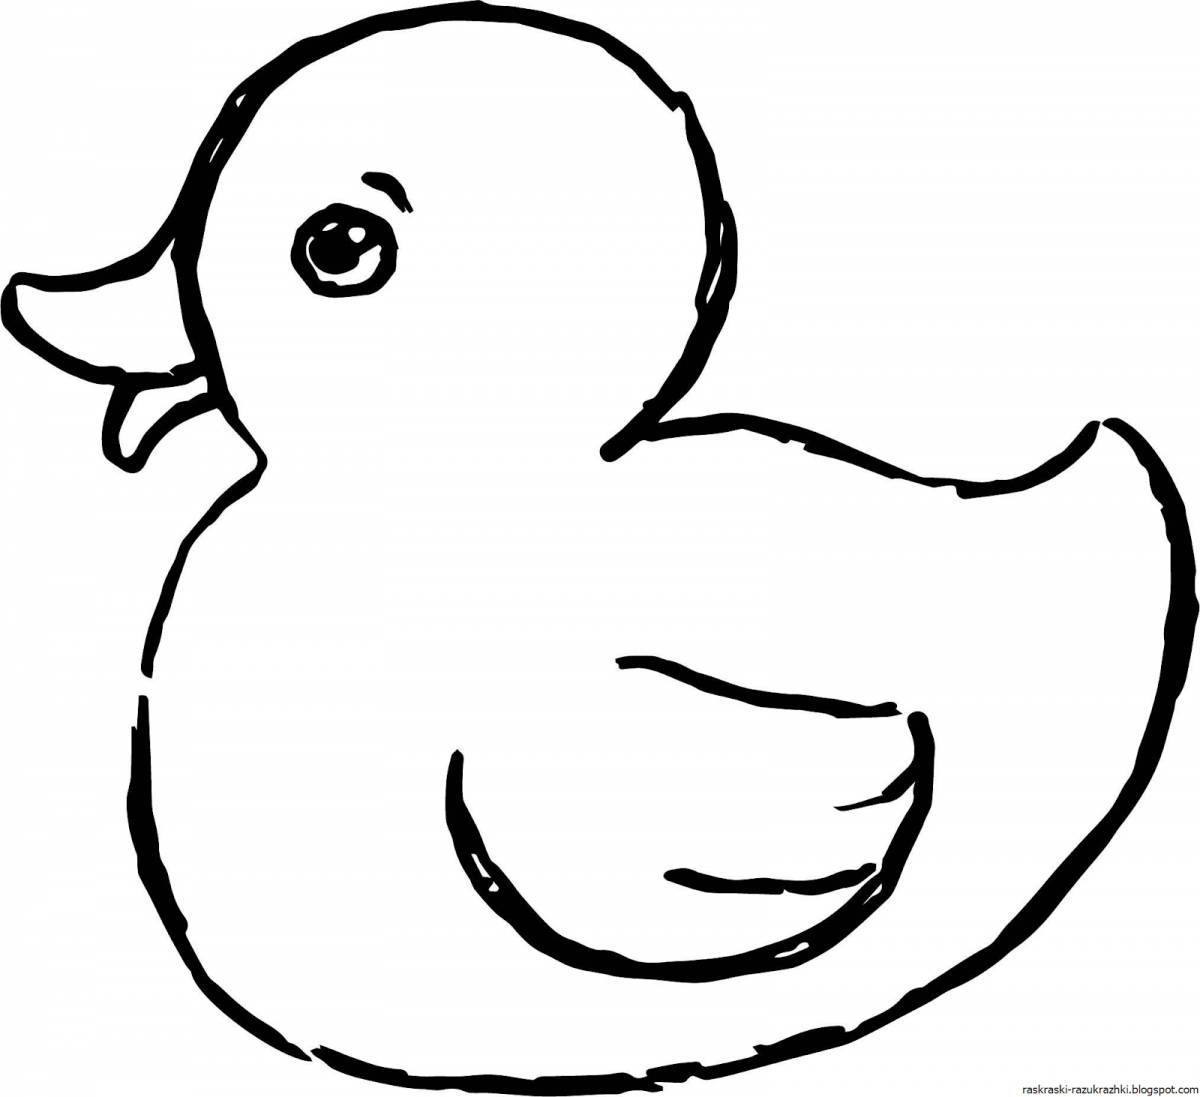 Lalafanfan duck coloring page #1